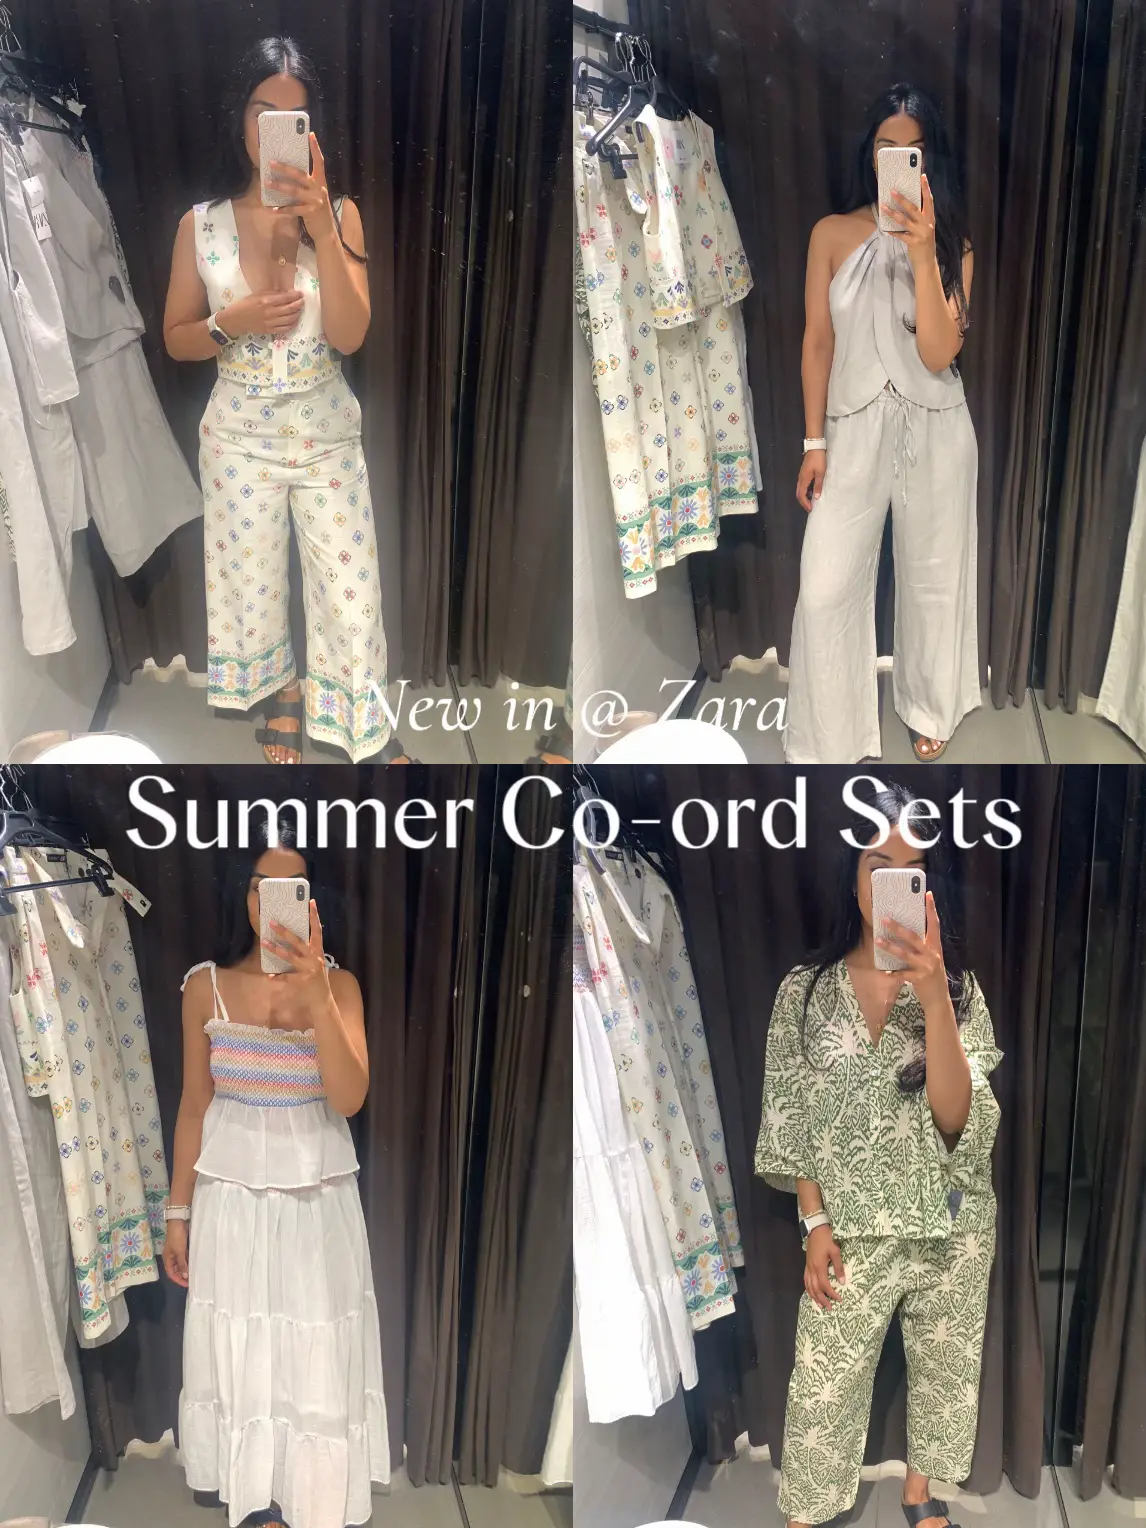 Summer Co-ord Sets, new in @ Zara